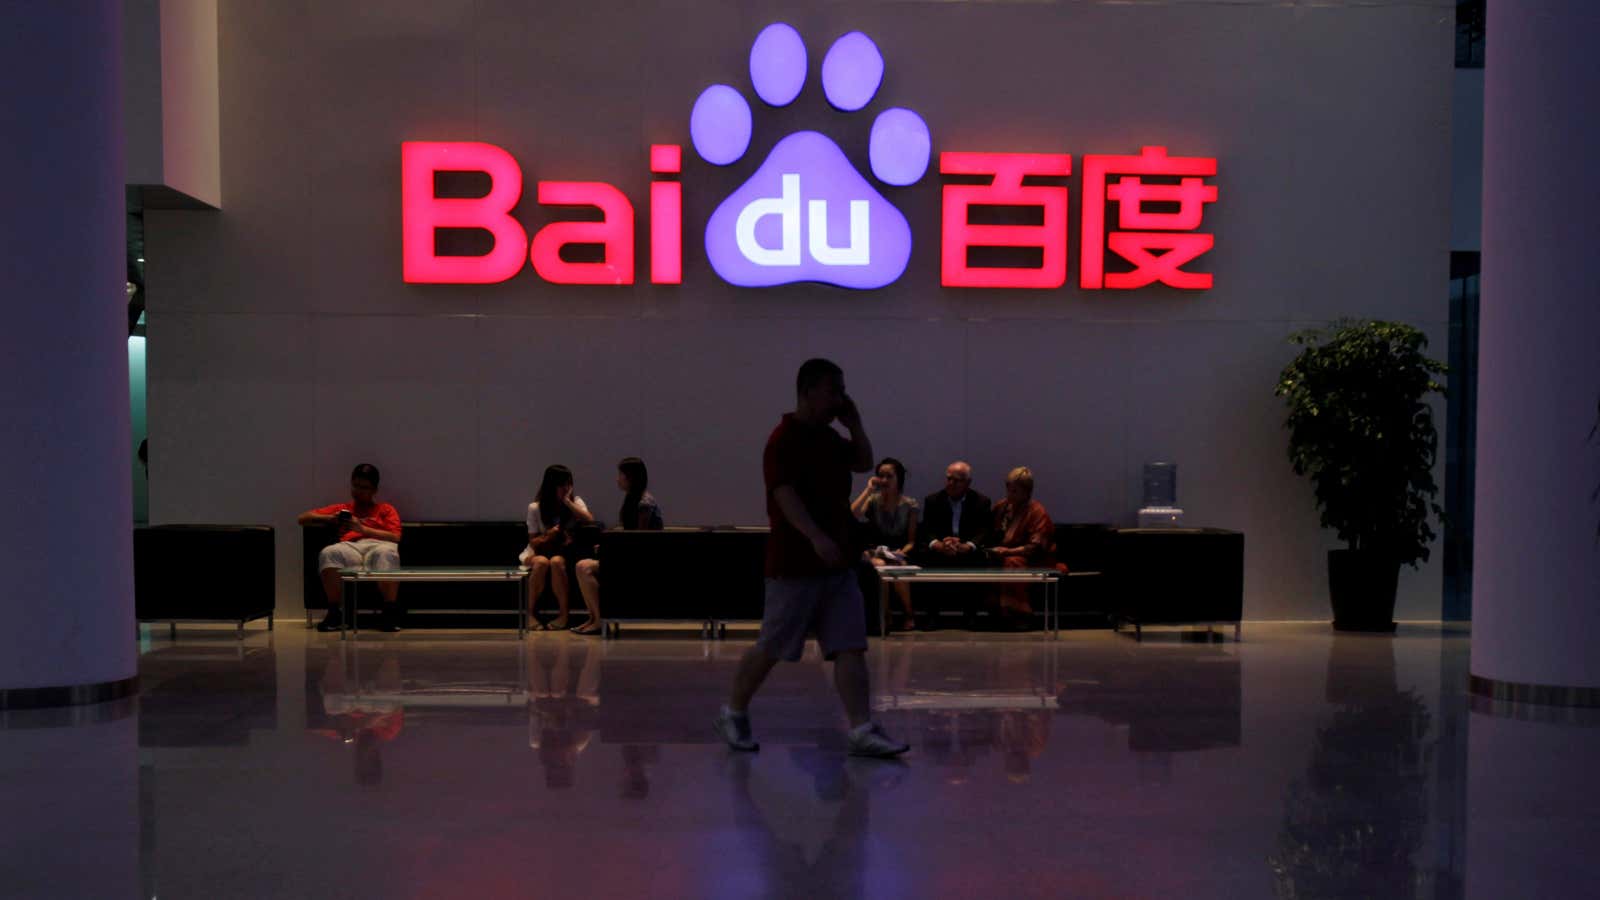 Baidu is stressing the “ai” in its name.